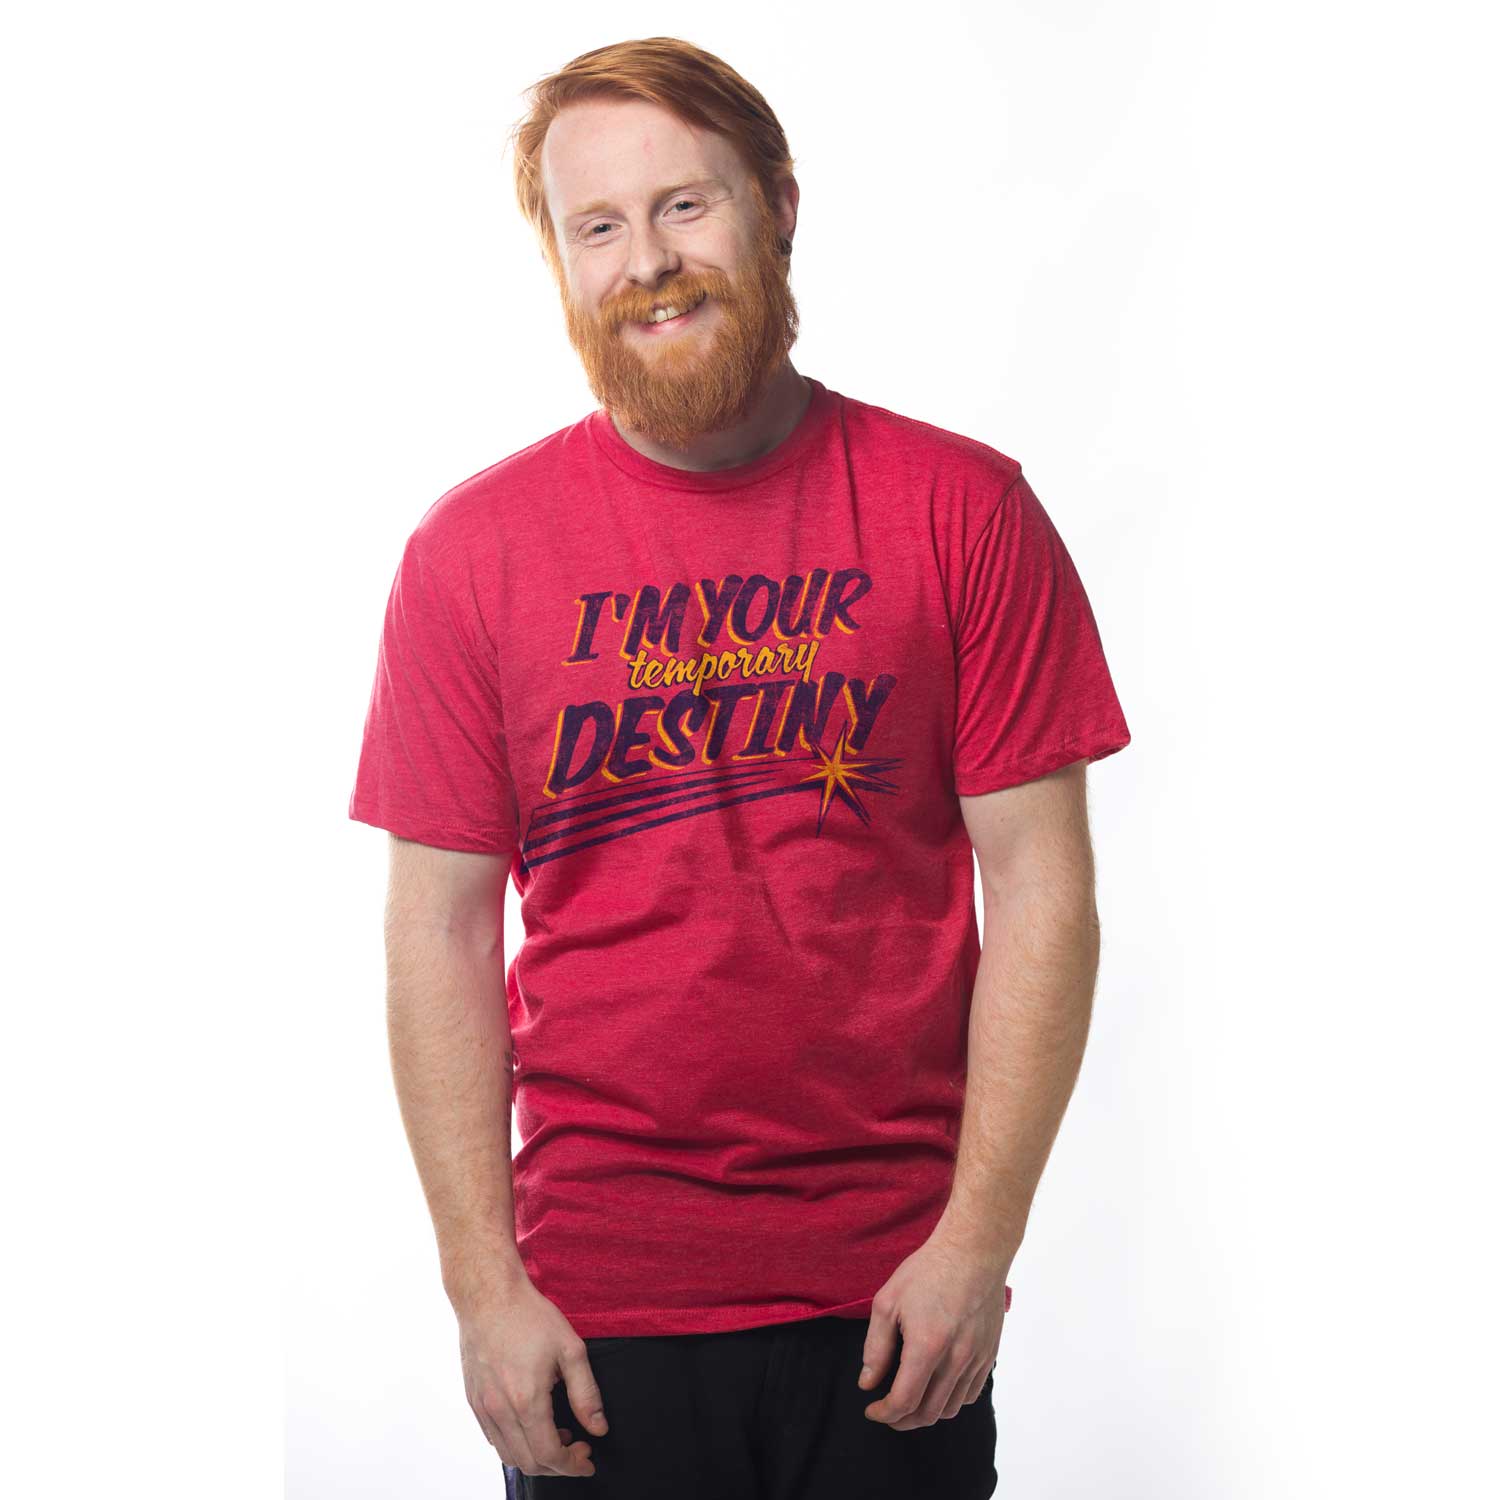 Men's Temporary Destiny Vintage Valentines Graphic Tee | Funny Playboy T-shirt | Solid Threads